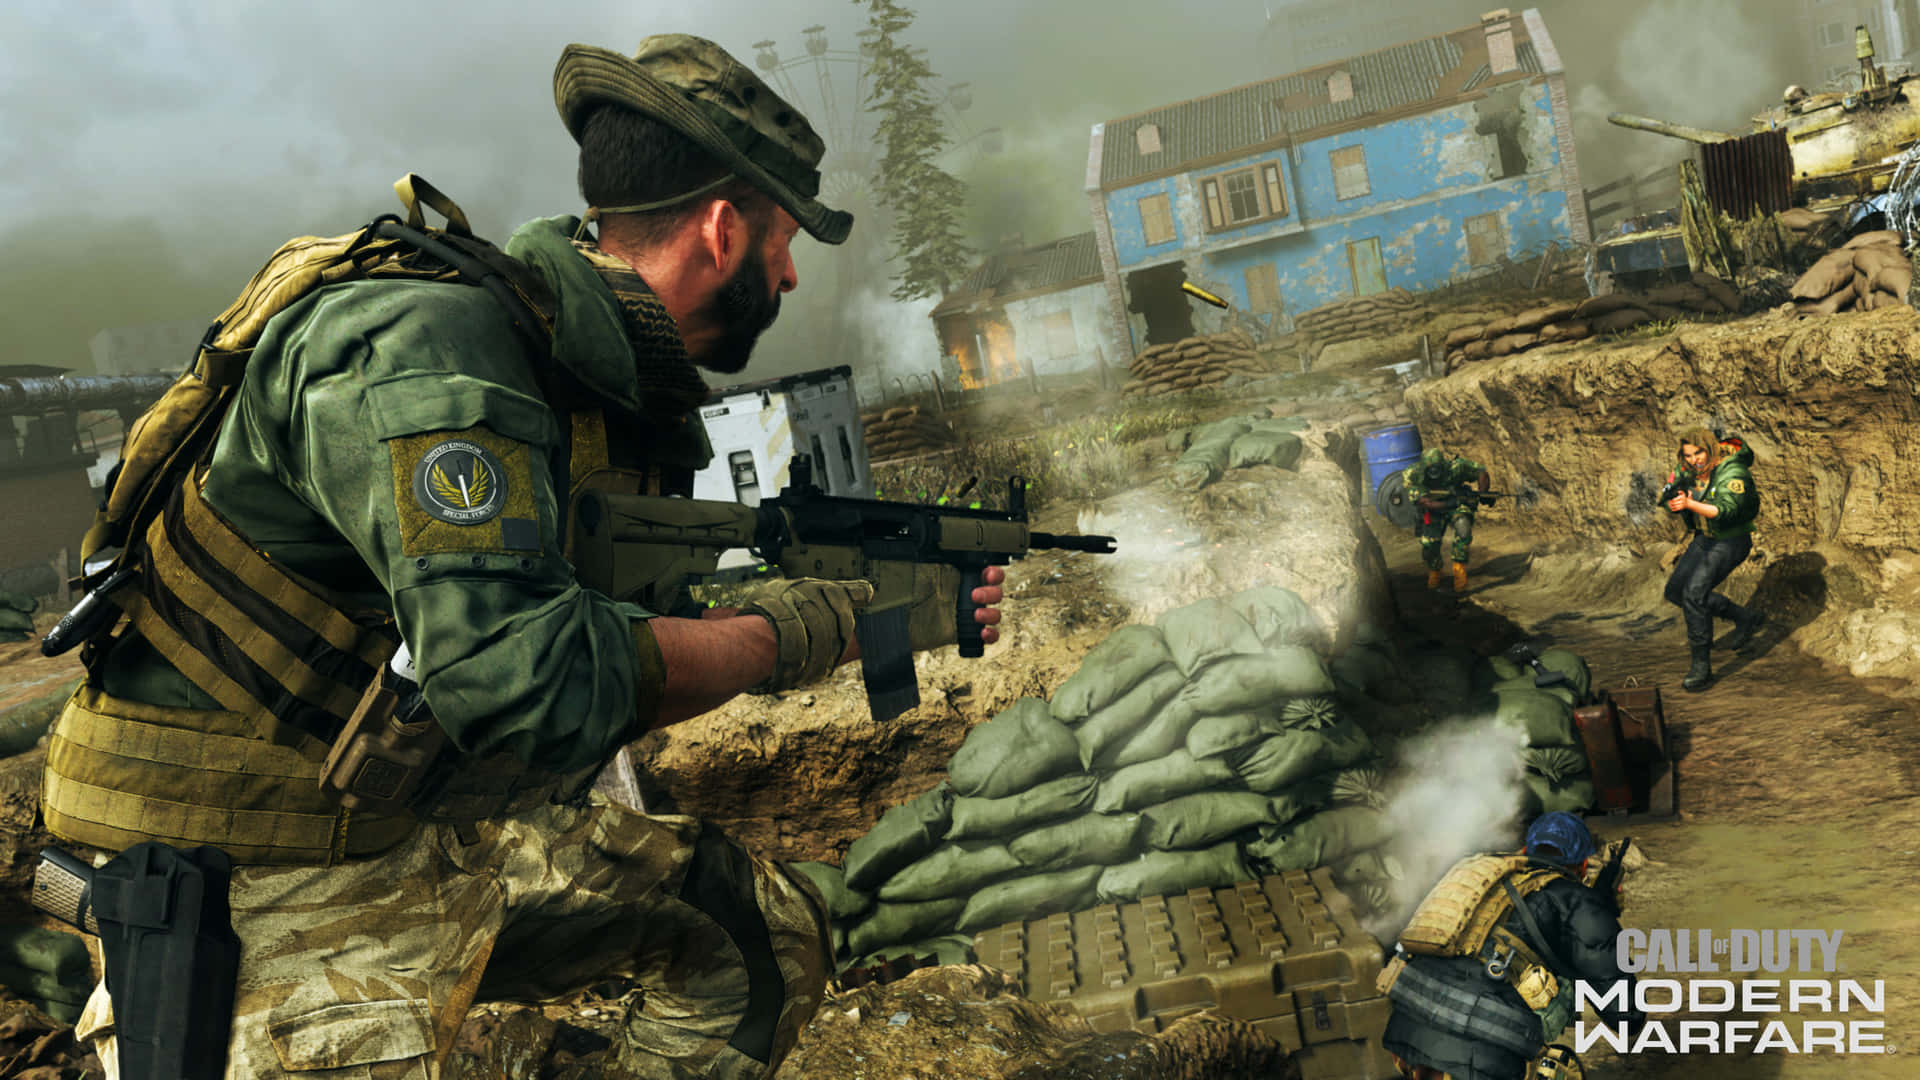 Immerse yourself into the immersive realm of the HD Call of Duty Modern Warfare.